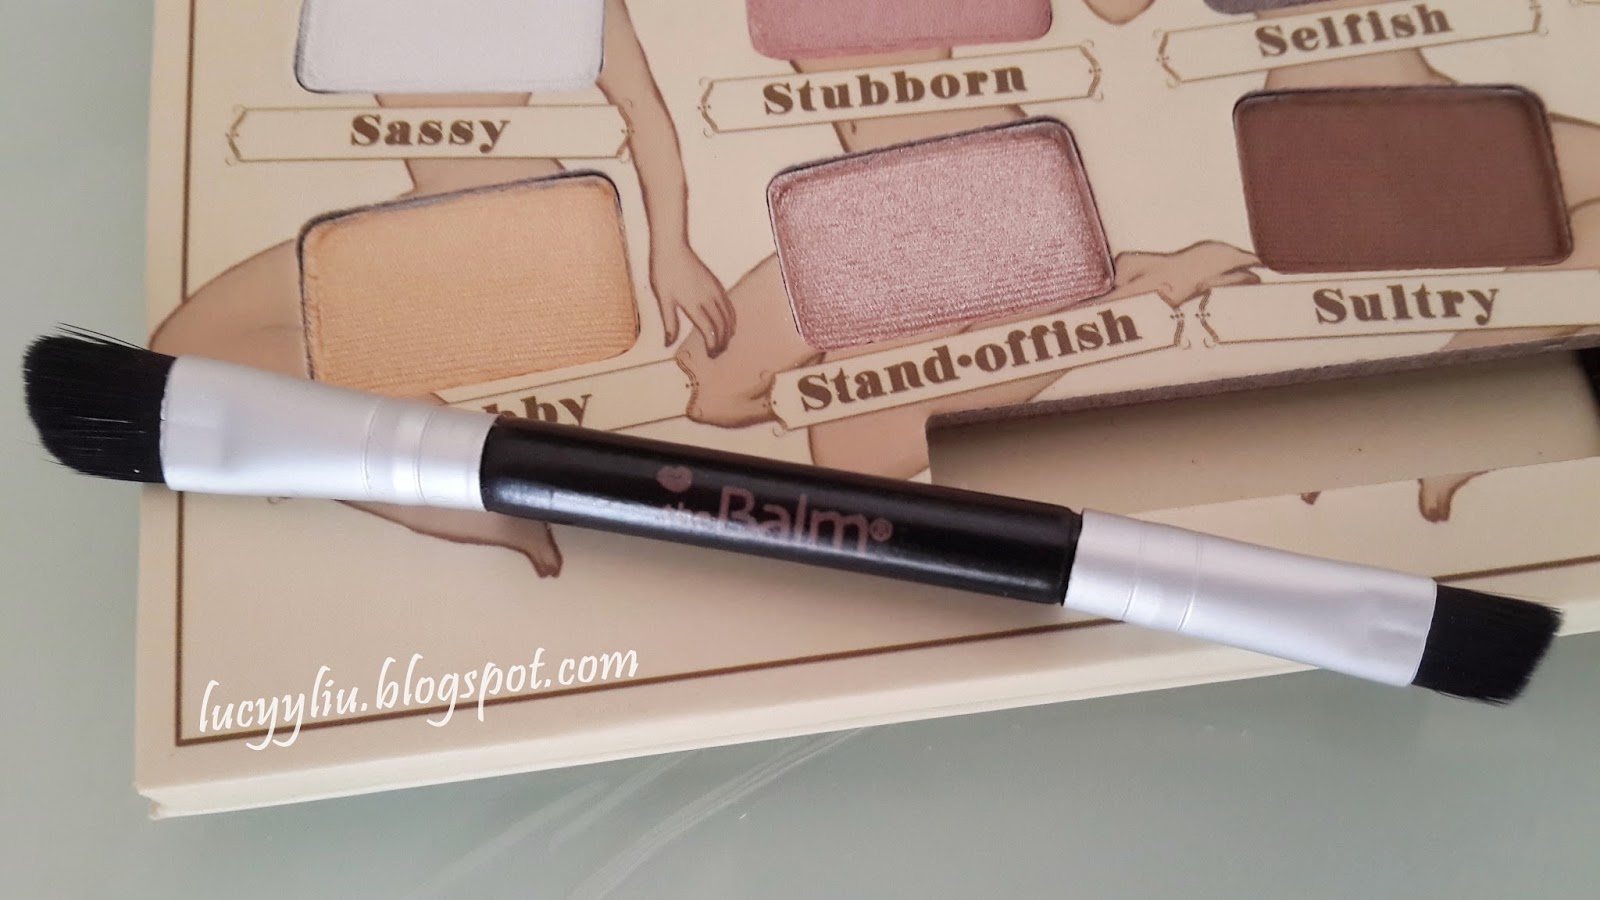 The Balm Nude 'tude Palette review